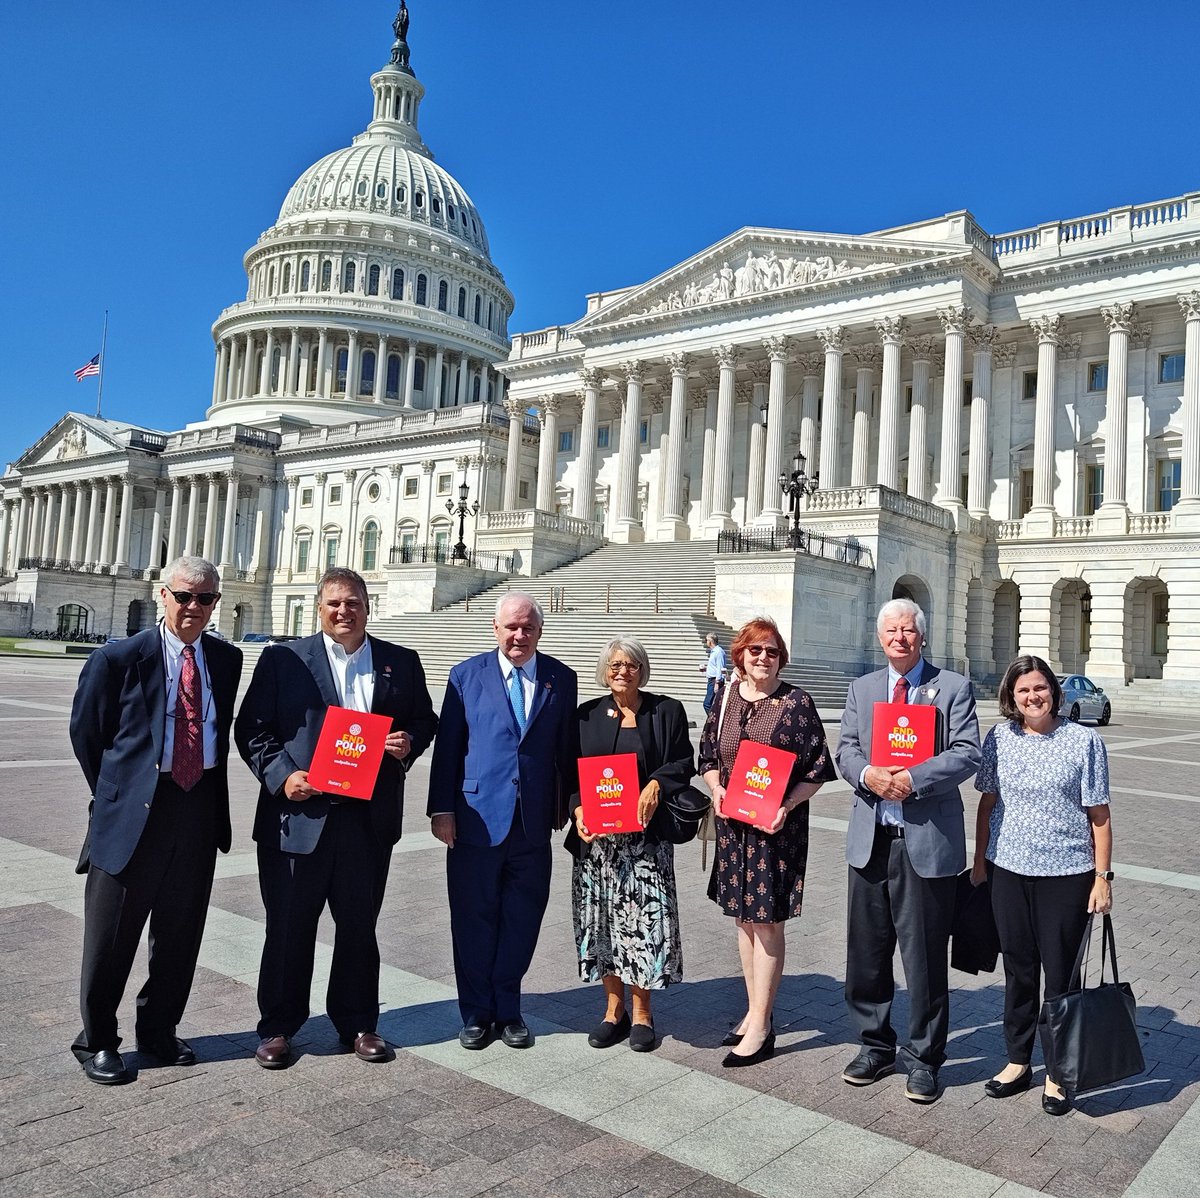 It's a beautiful day in the US Capitol. Great to be with dedicated @Rotary leaders to recognize and further encourage US Congressional leadership in the fight to #EndPolio. @EndPolioNow